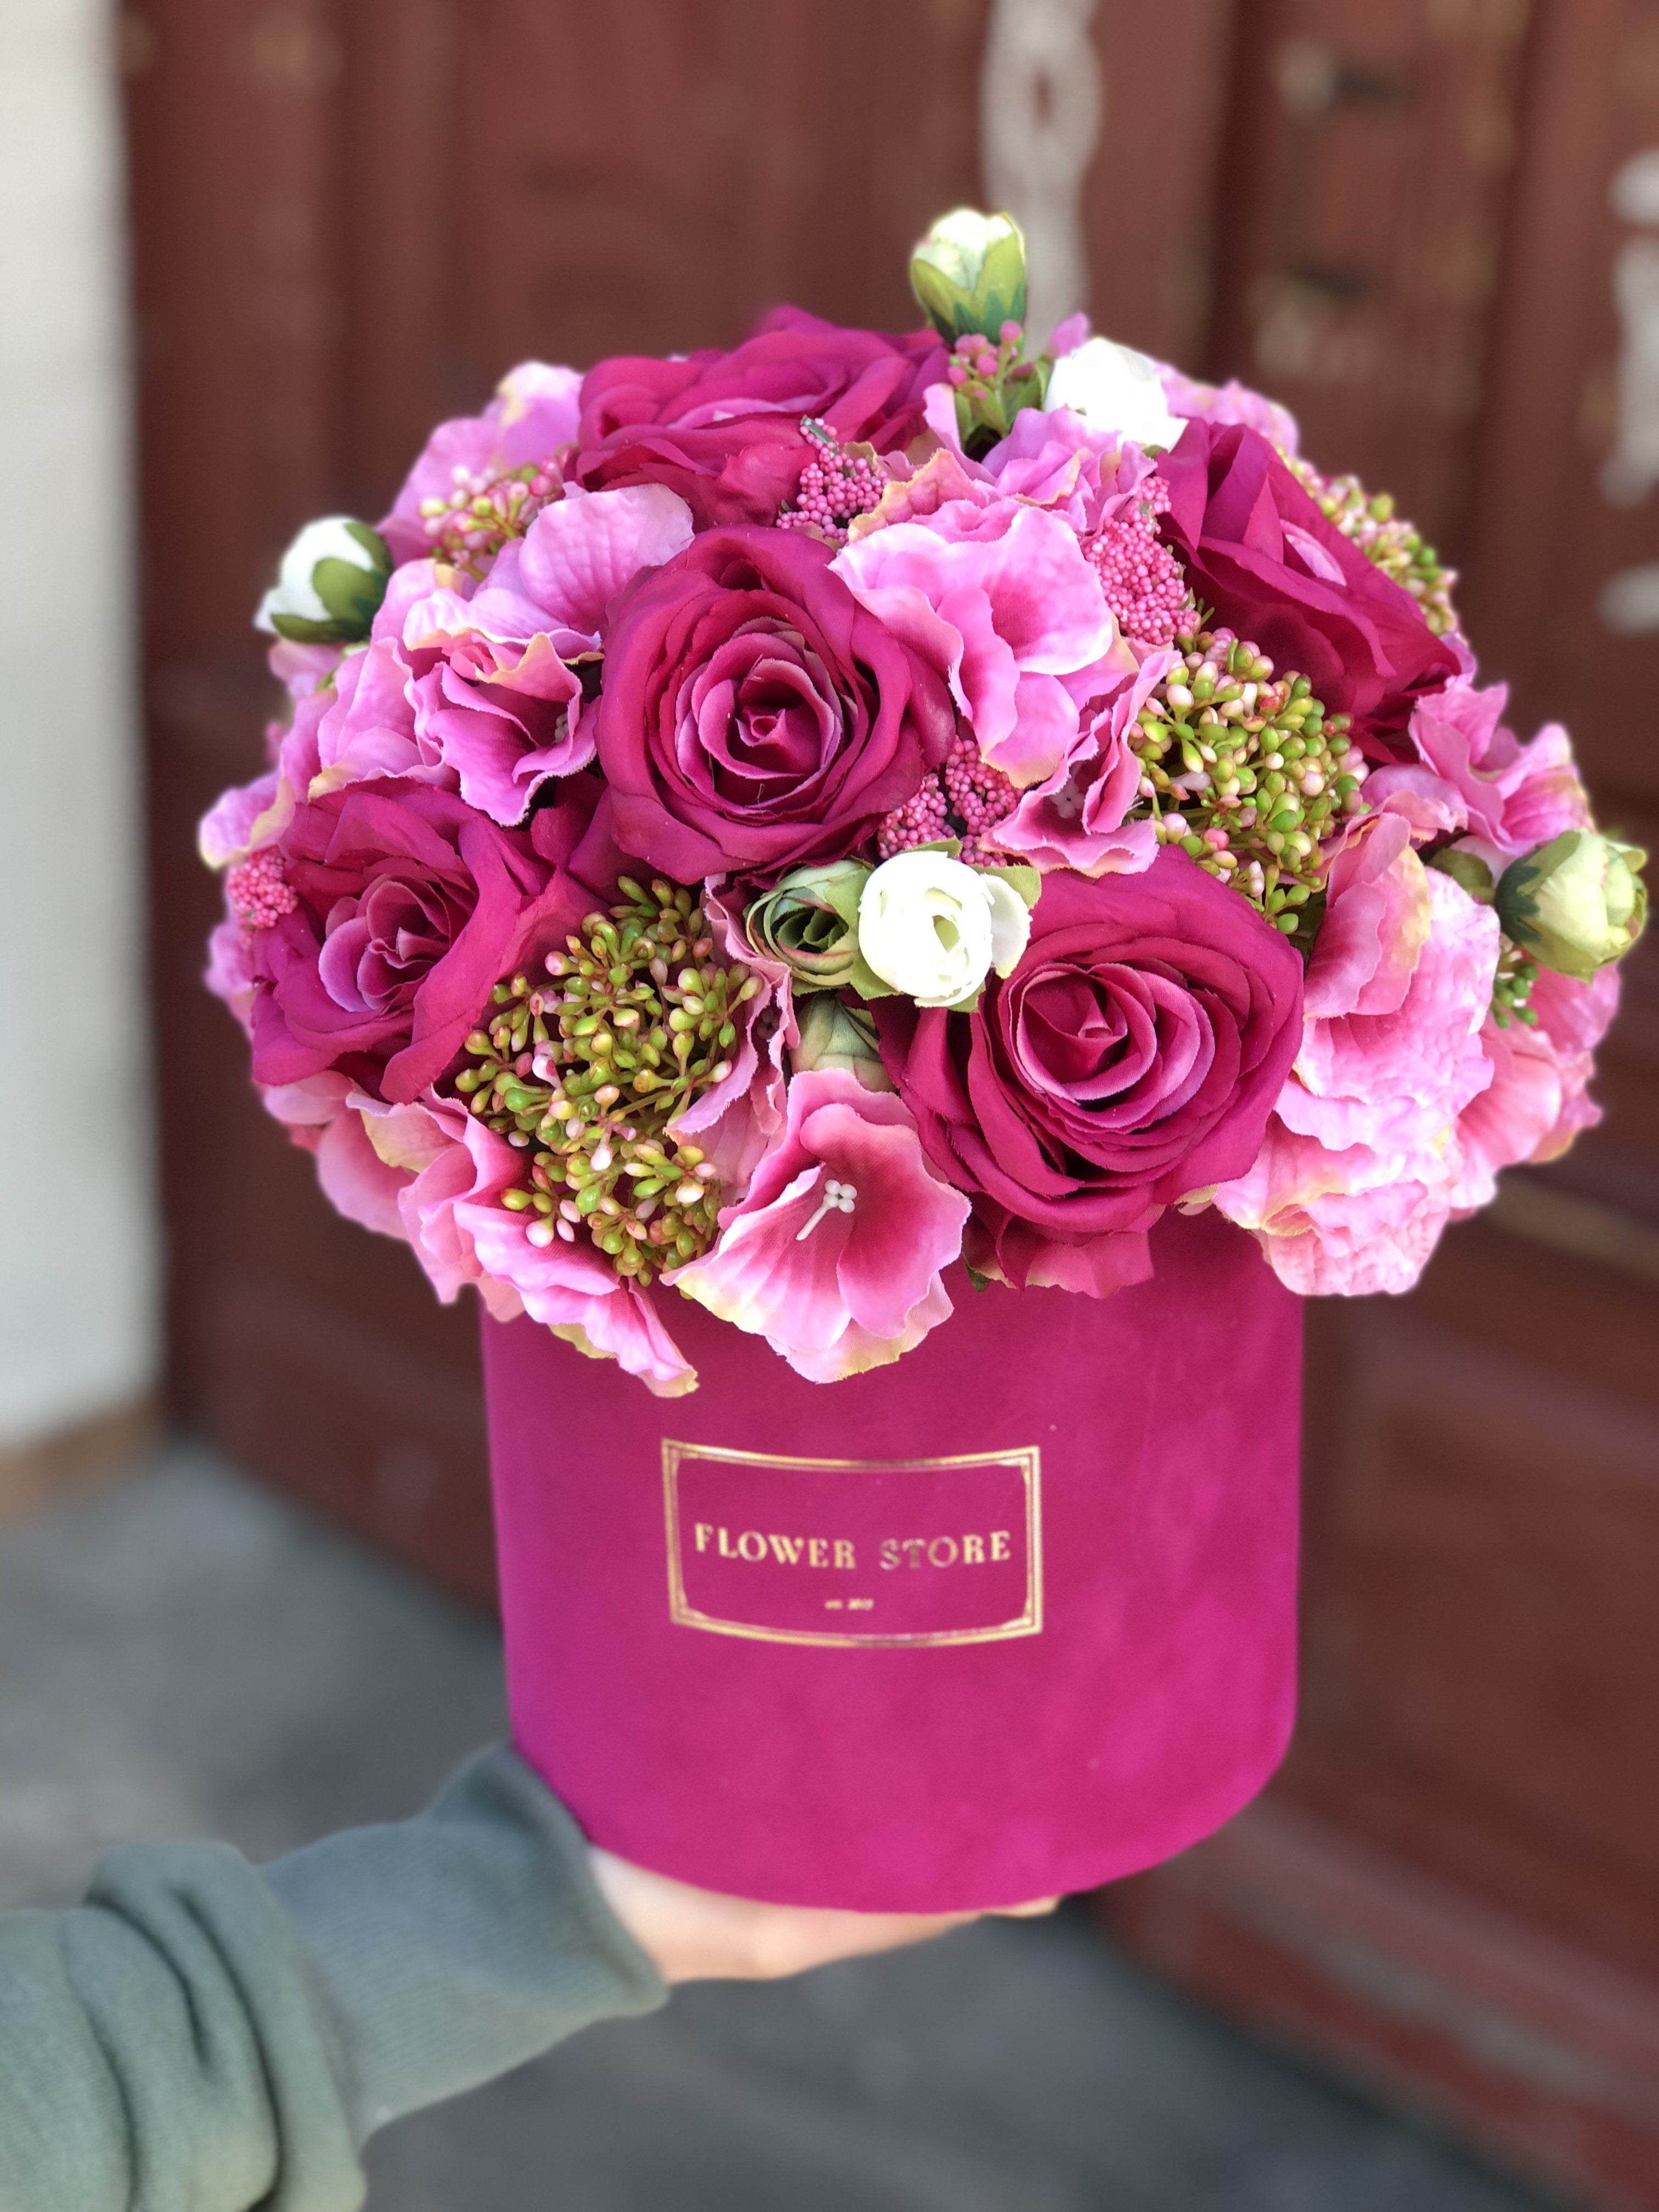 A flocked box with a fuchsia composition - artificial flowers